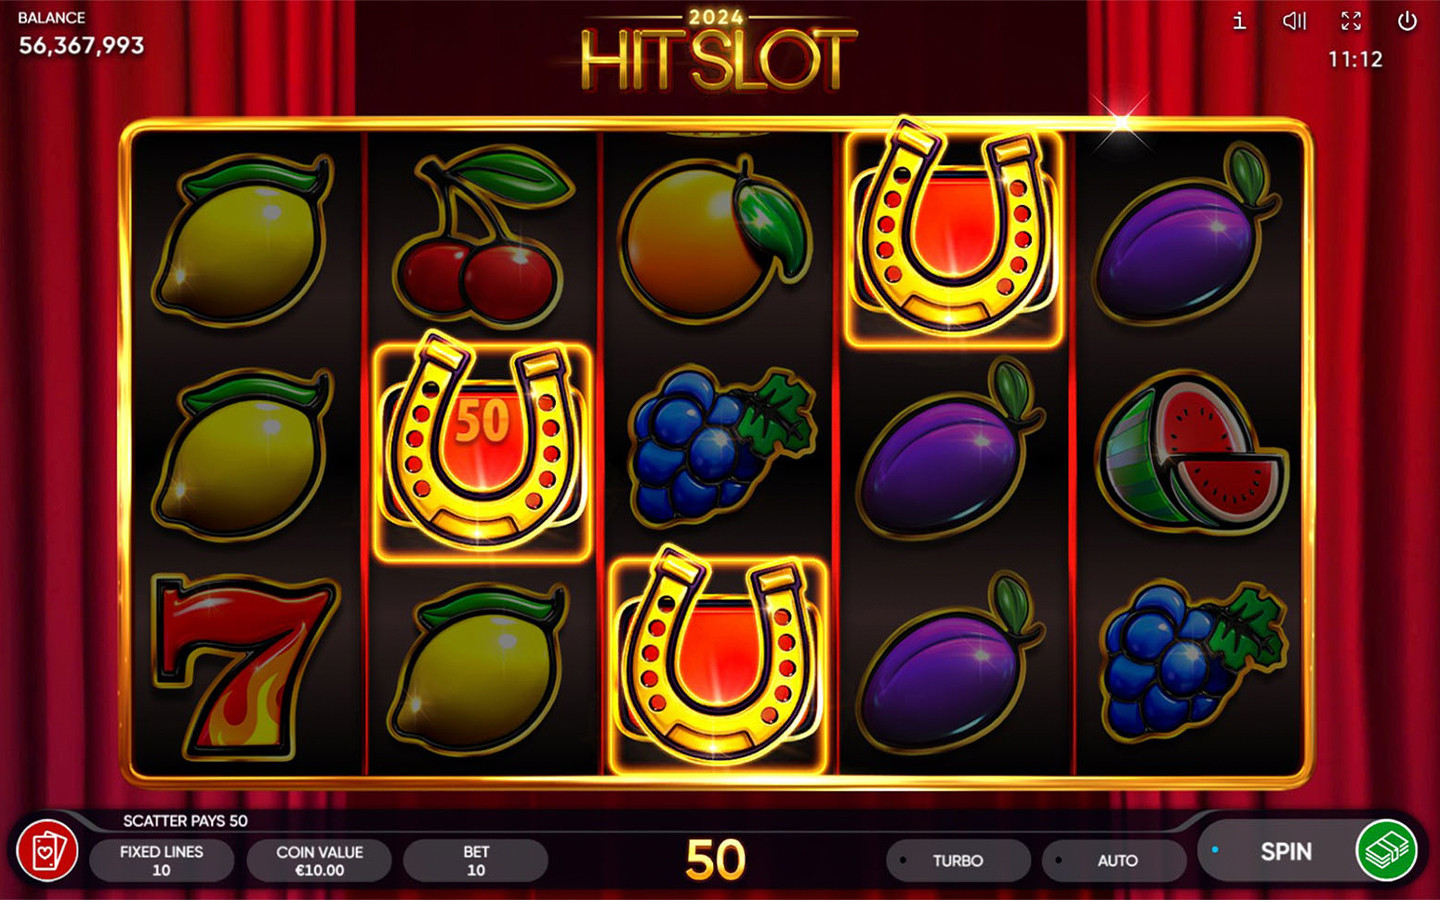 NEW GAME RELEASES | 2024 Hit Slot